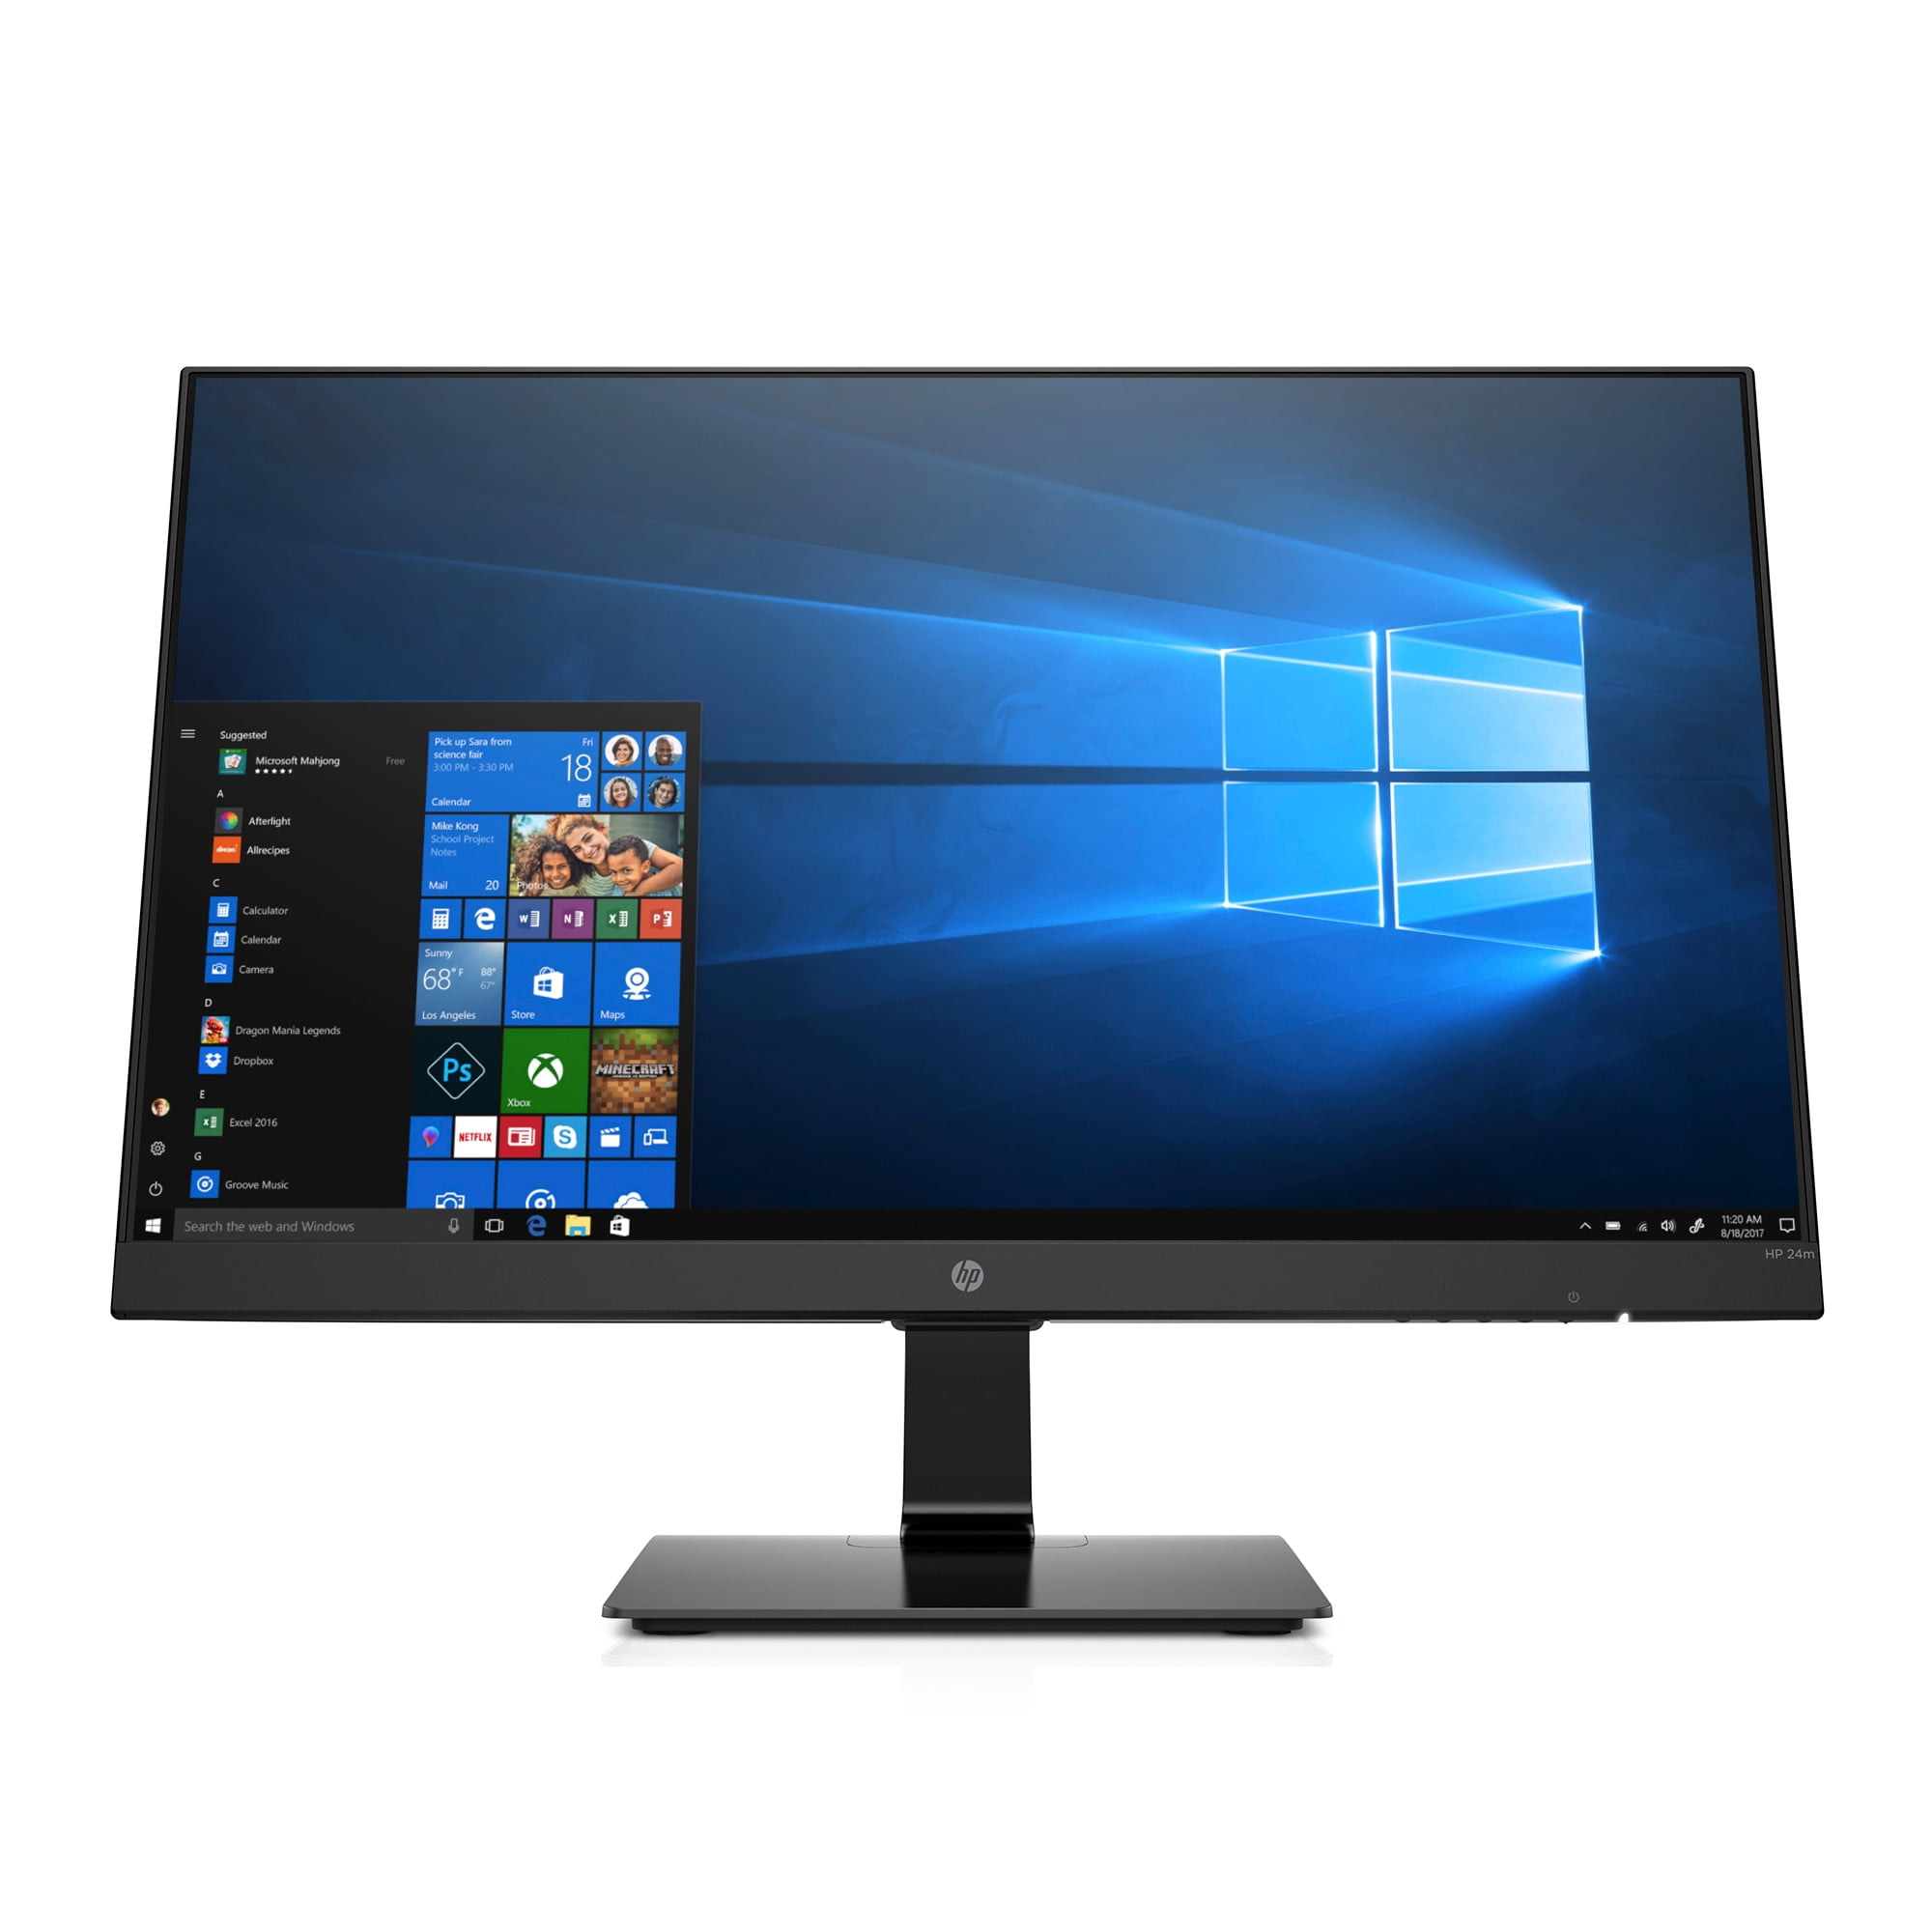 To contribute A central tool that plays an important role necklace HP 24" IPS 1920x1080 VGA HDMI 60hz 5ms HD Monitor - 24M - Walmart.com